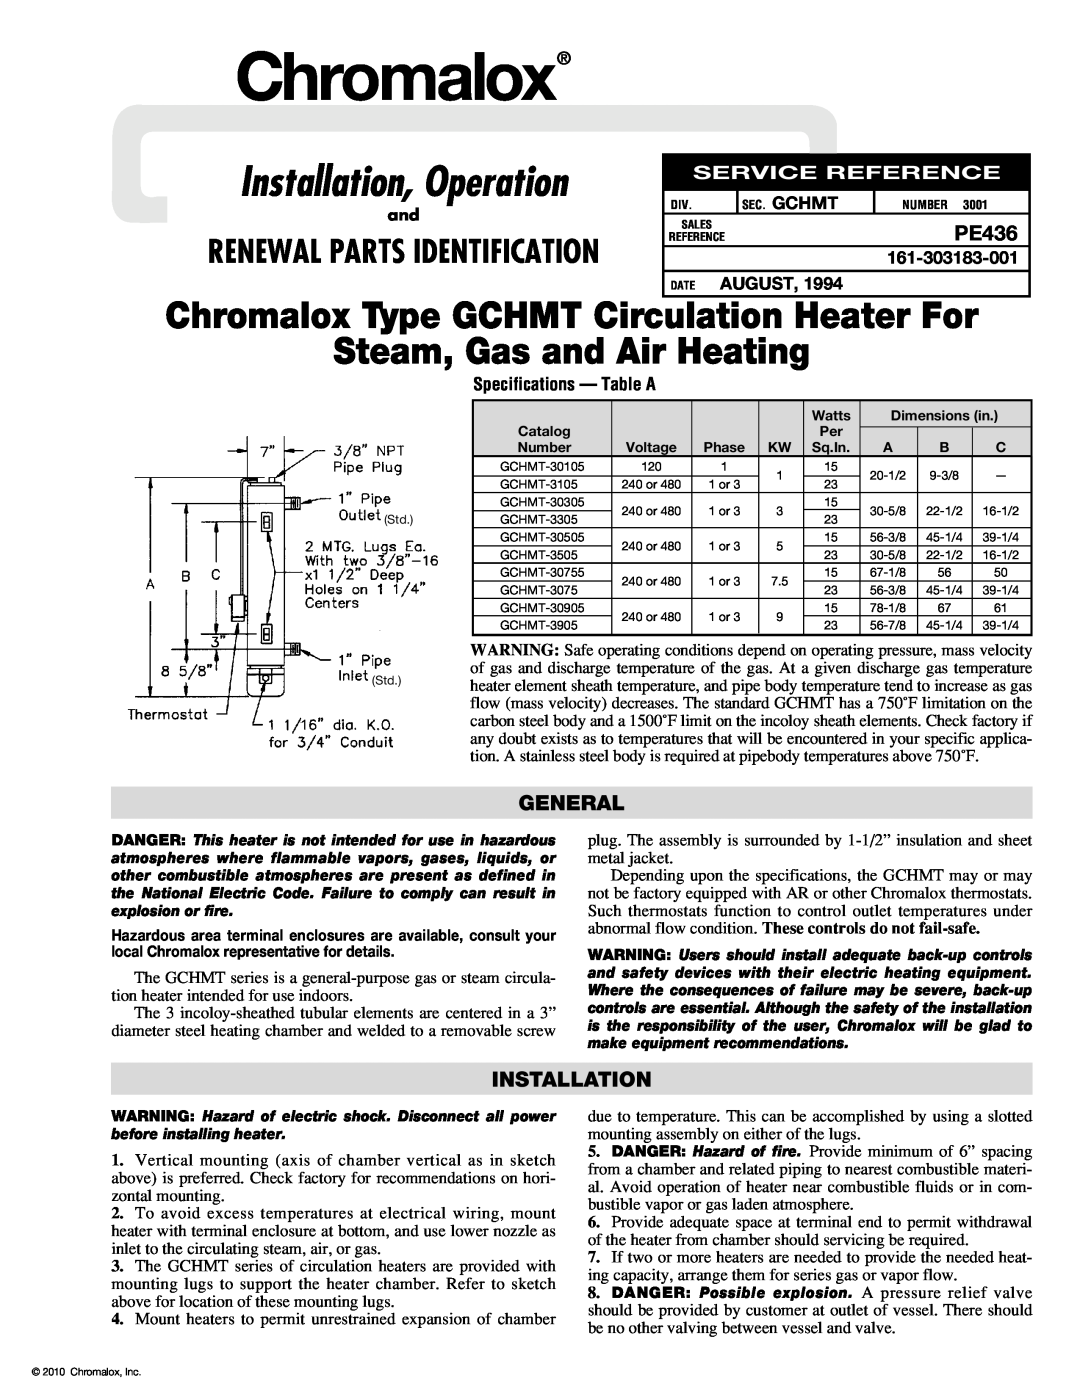 Chromalox PE436 specifications General, Specifications - Table A, Chromalox, Installation, Operation, 161-303183-001 